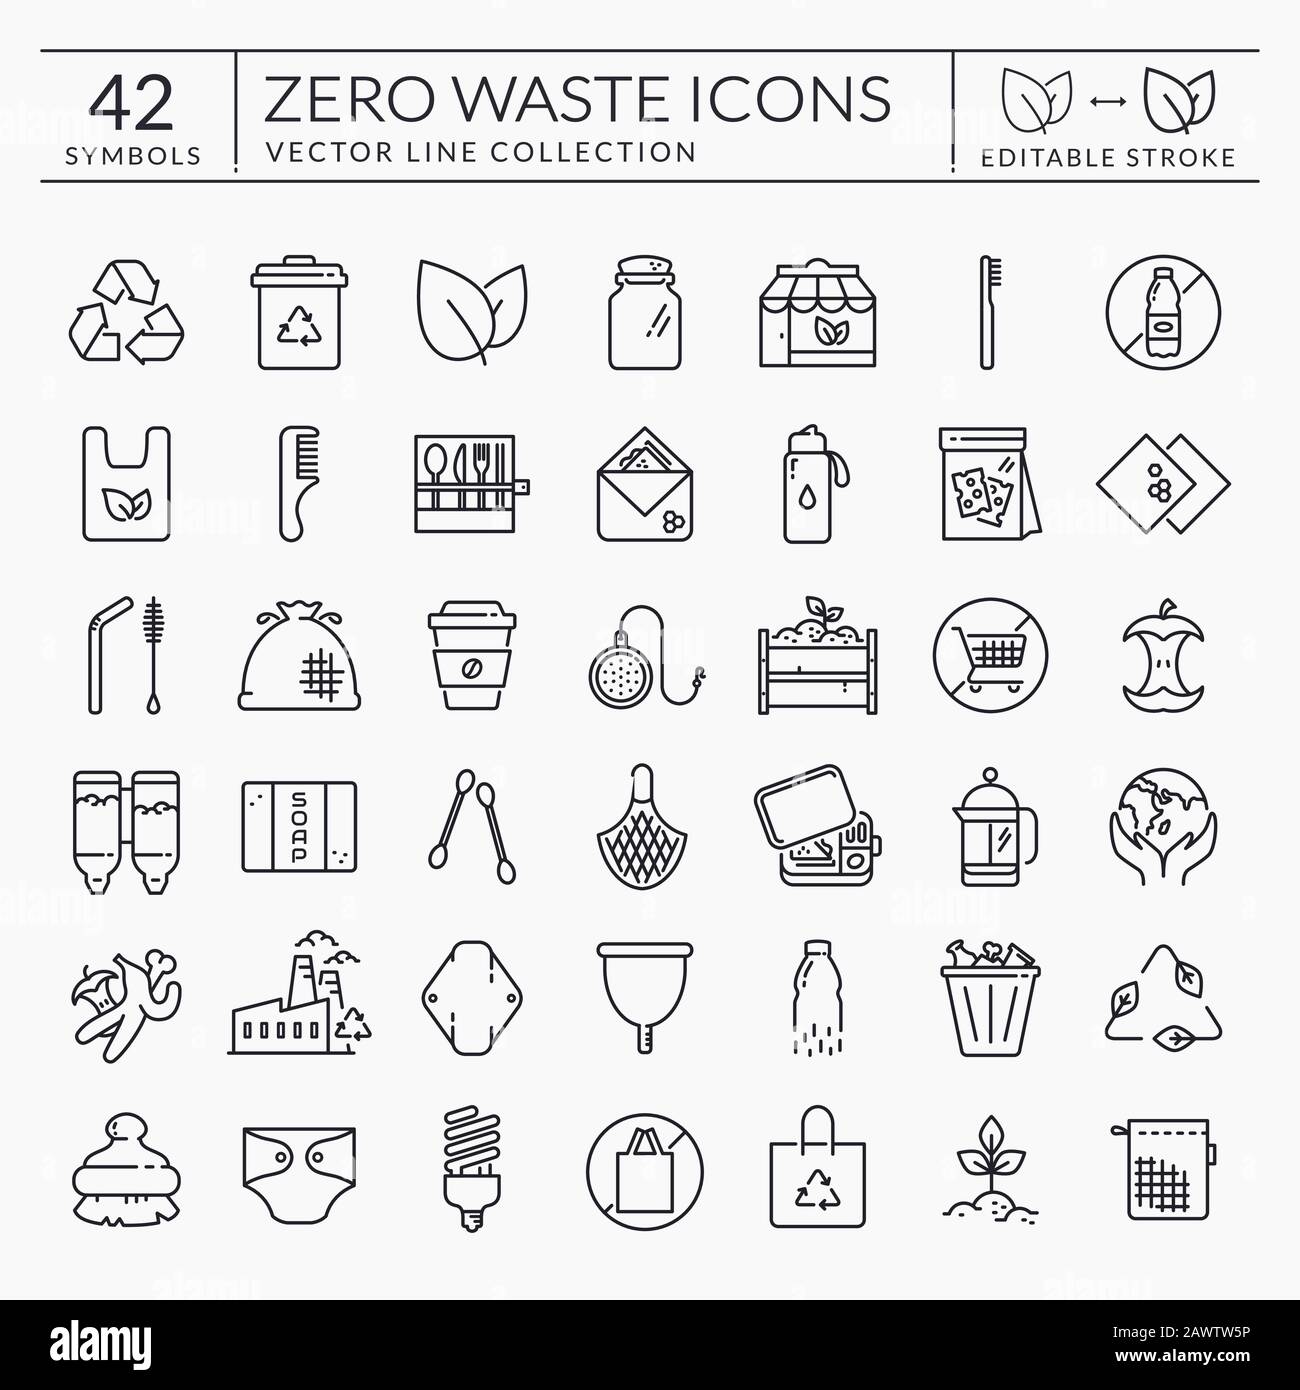 Zero waste line icons. Outline symbols isolated on white background. Recycling, reusable items, plastic free, save the Planet and eco lifestyle themes Stock Vector